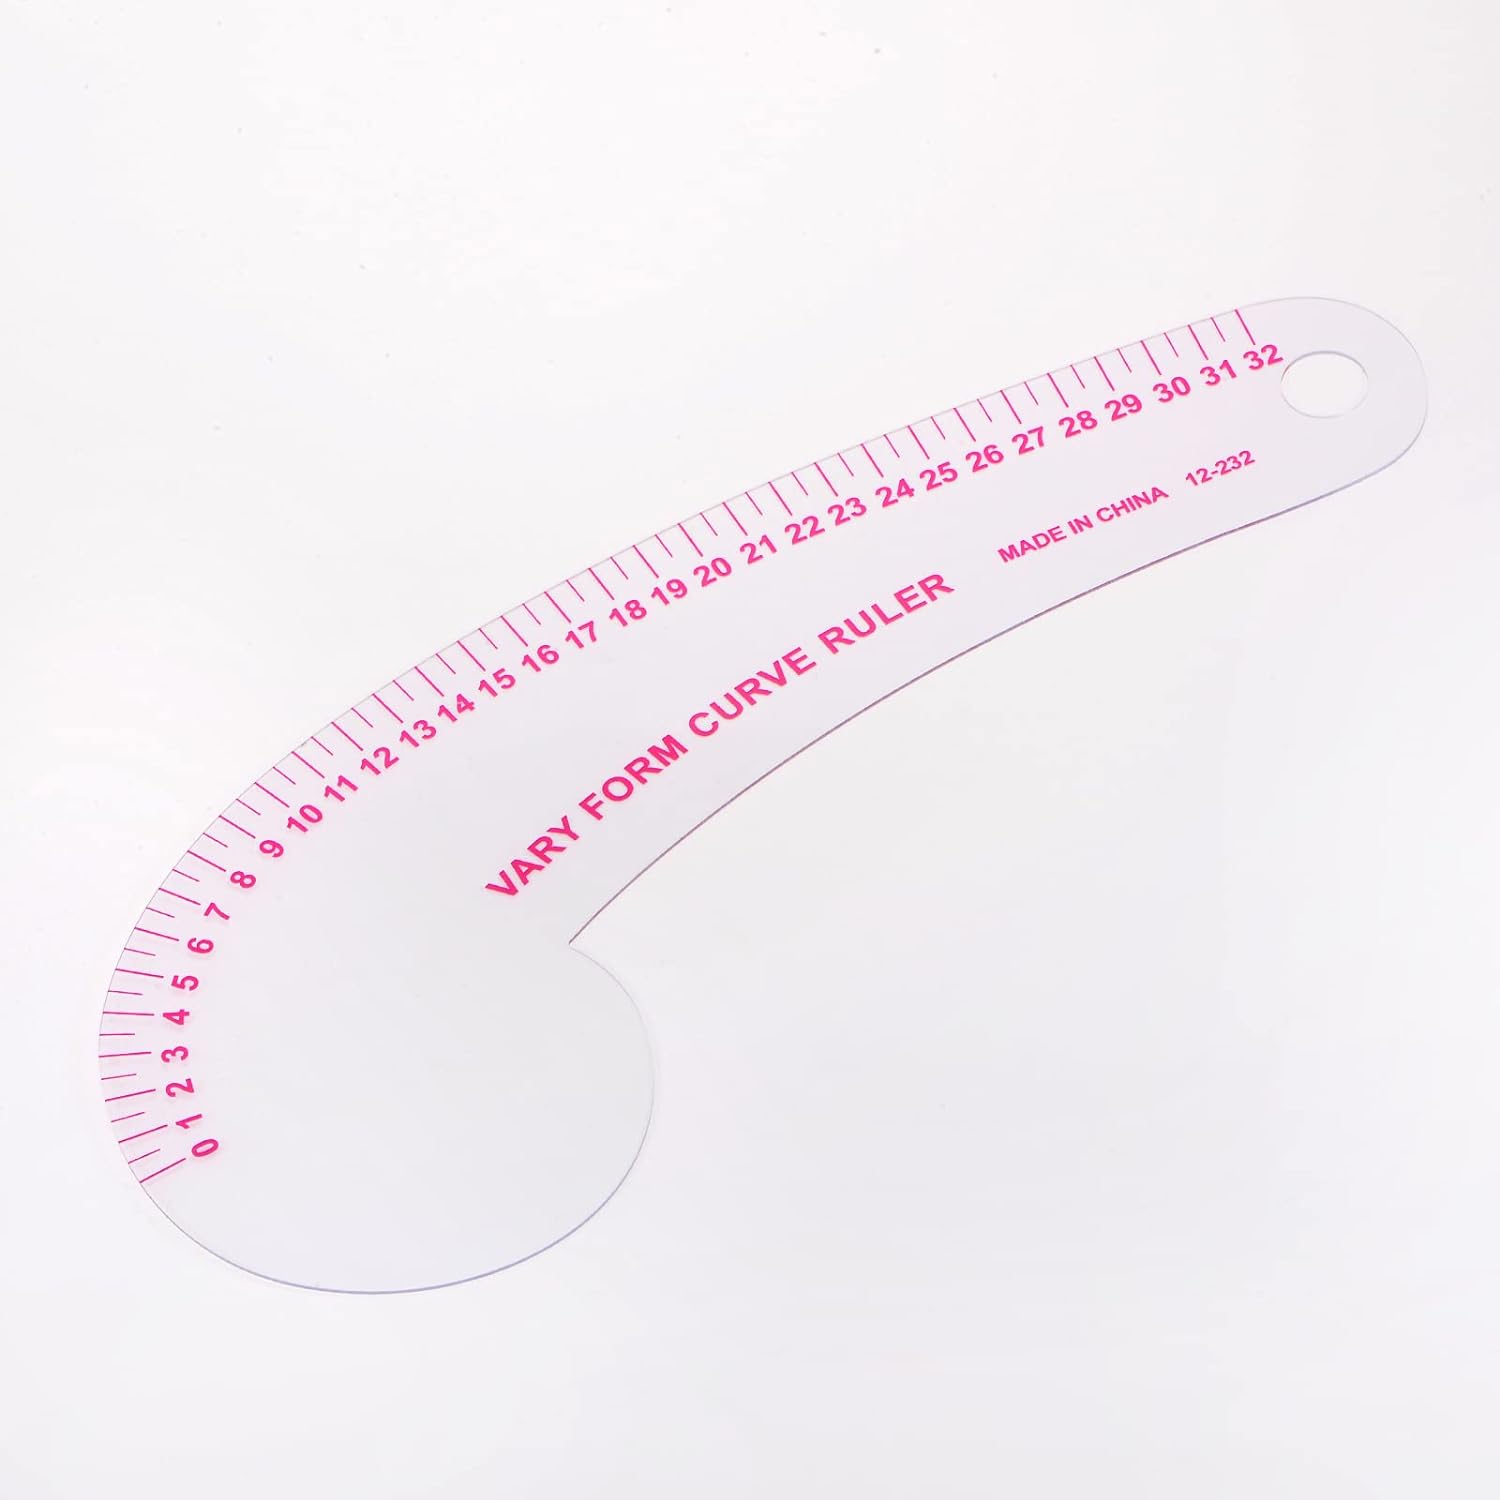 sourcing map Styling Sewing French Curve Ruler, 30x11.5cm Dress Makers Ruler Clear Sewing Tailors Pattern Making Ruler for Fashion Design and Guides for Fabric